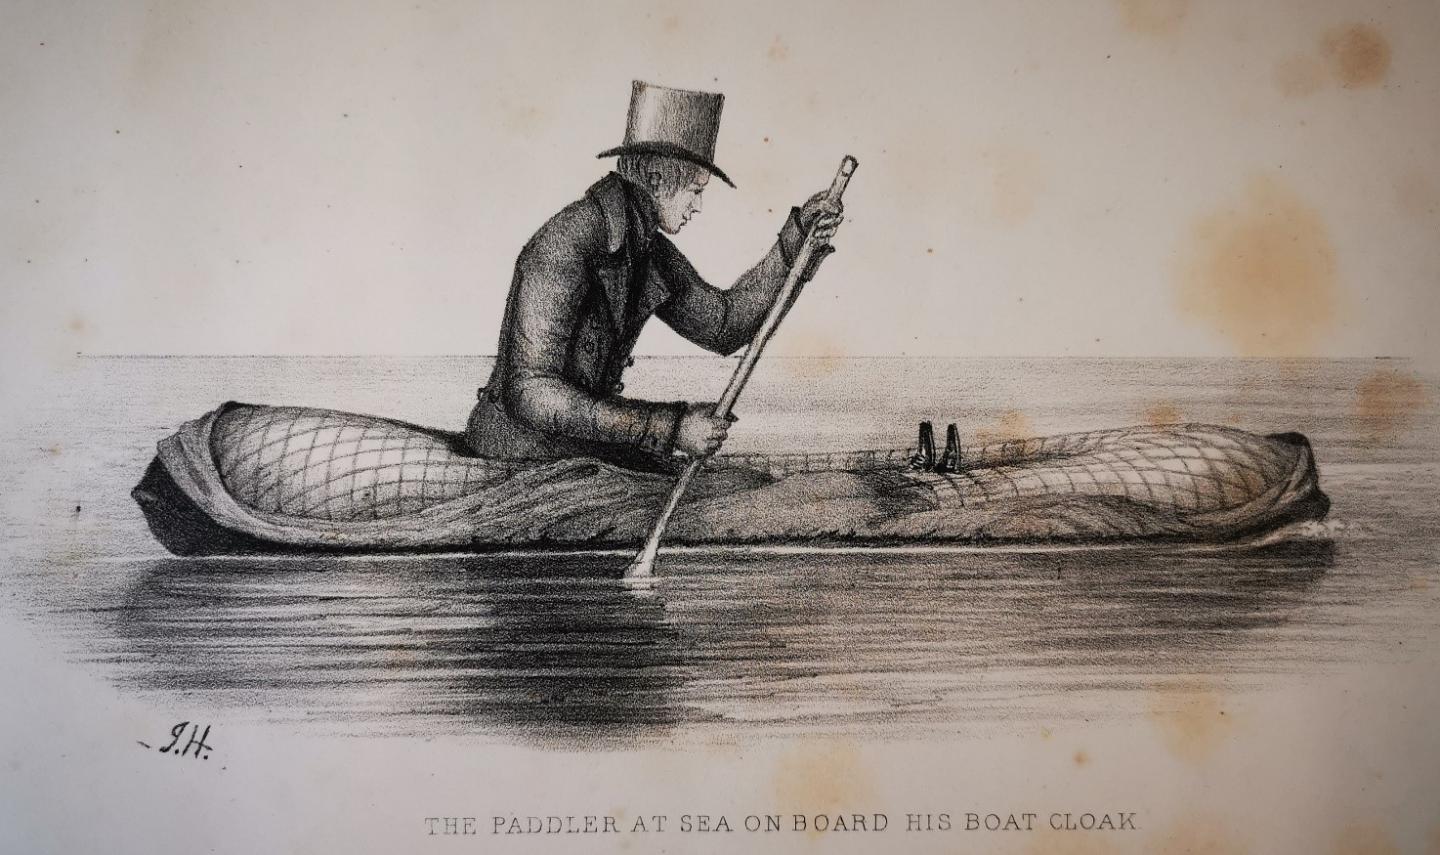 Paddling as hard as one can! Peter Halkett's The Boat Cloak 1848